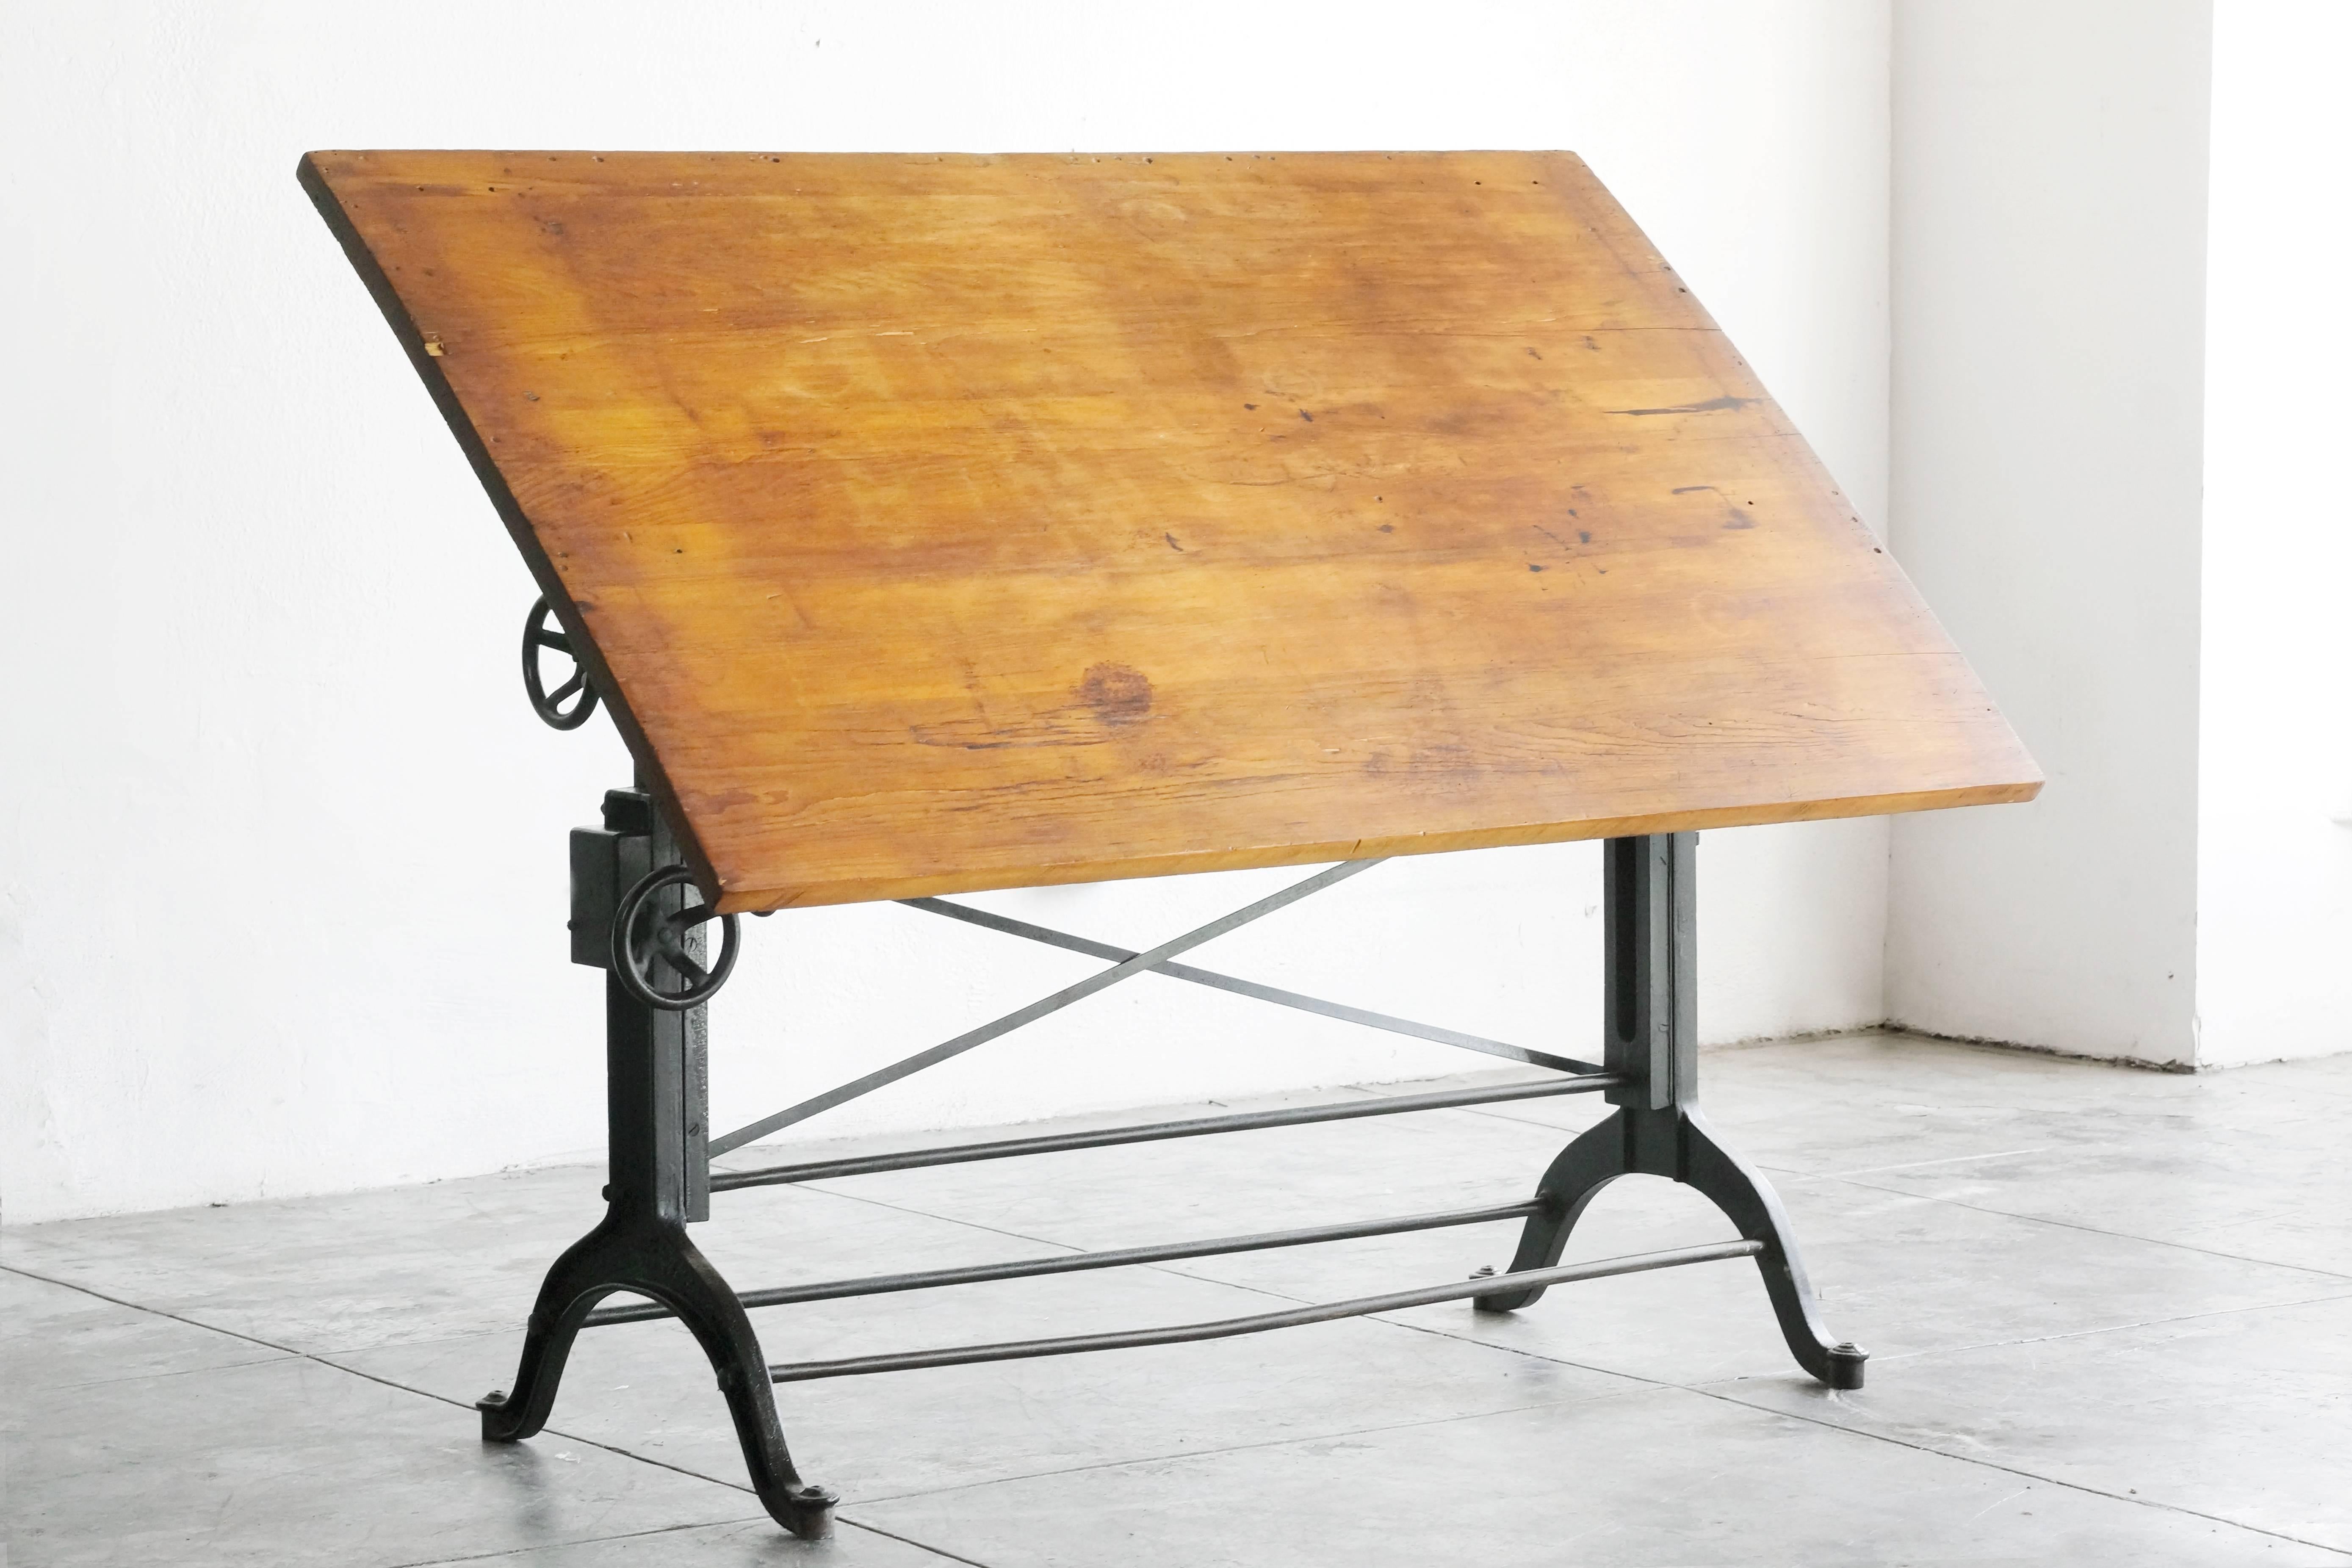 Early 1900s antique wood and cast iron drafting table by the Frederick Post Co. of Chicago, San Fransisco. This heavy-duty, fully adjustable table is in beautiful condition. Table-top shows a rich vintage patina.

Dimensions when top is parallel